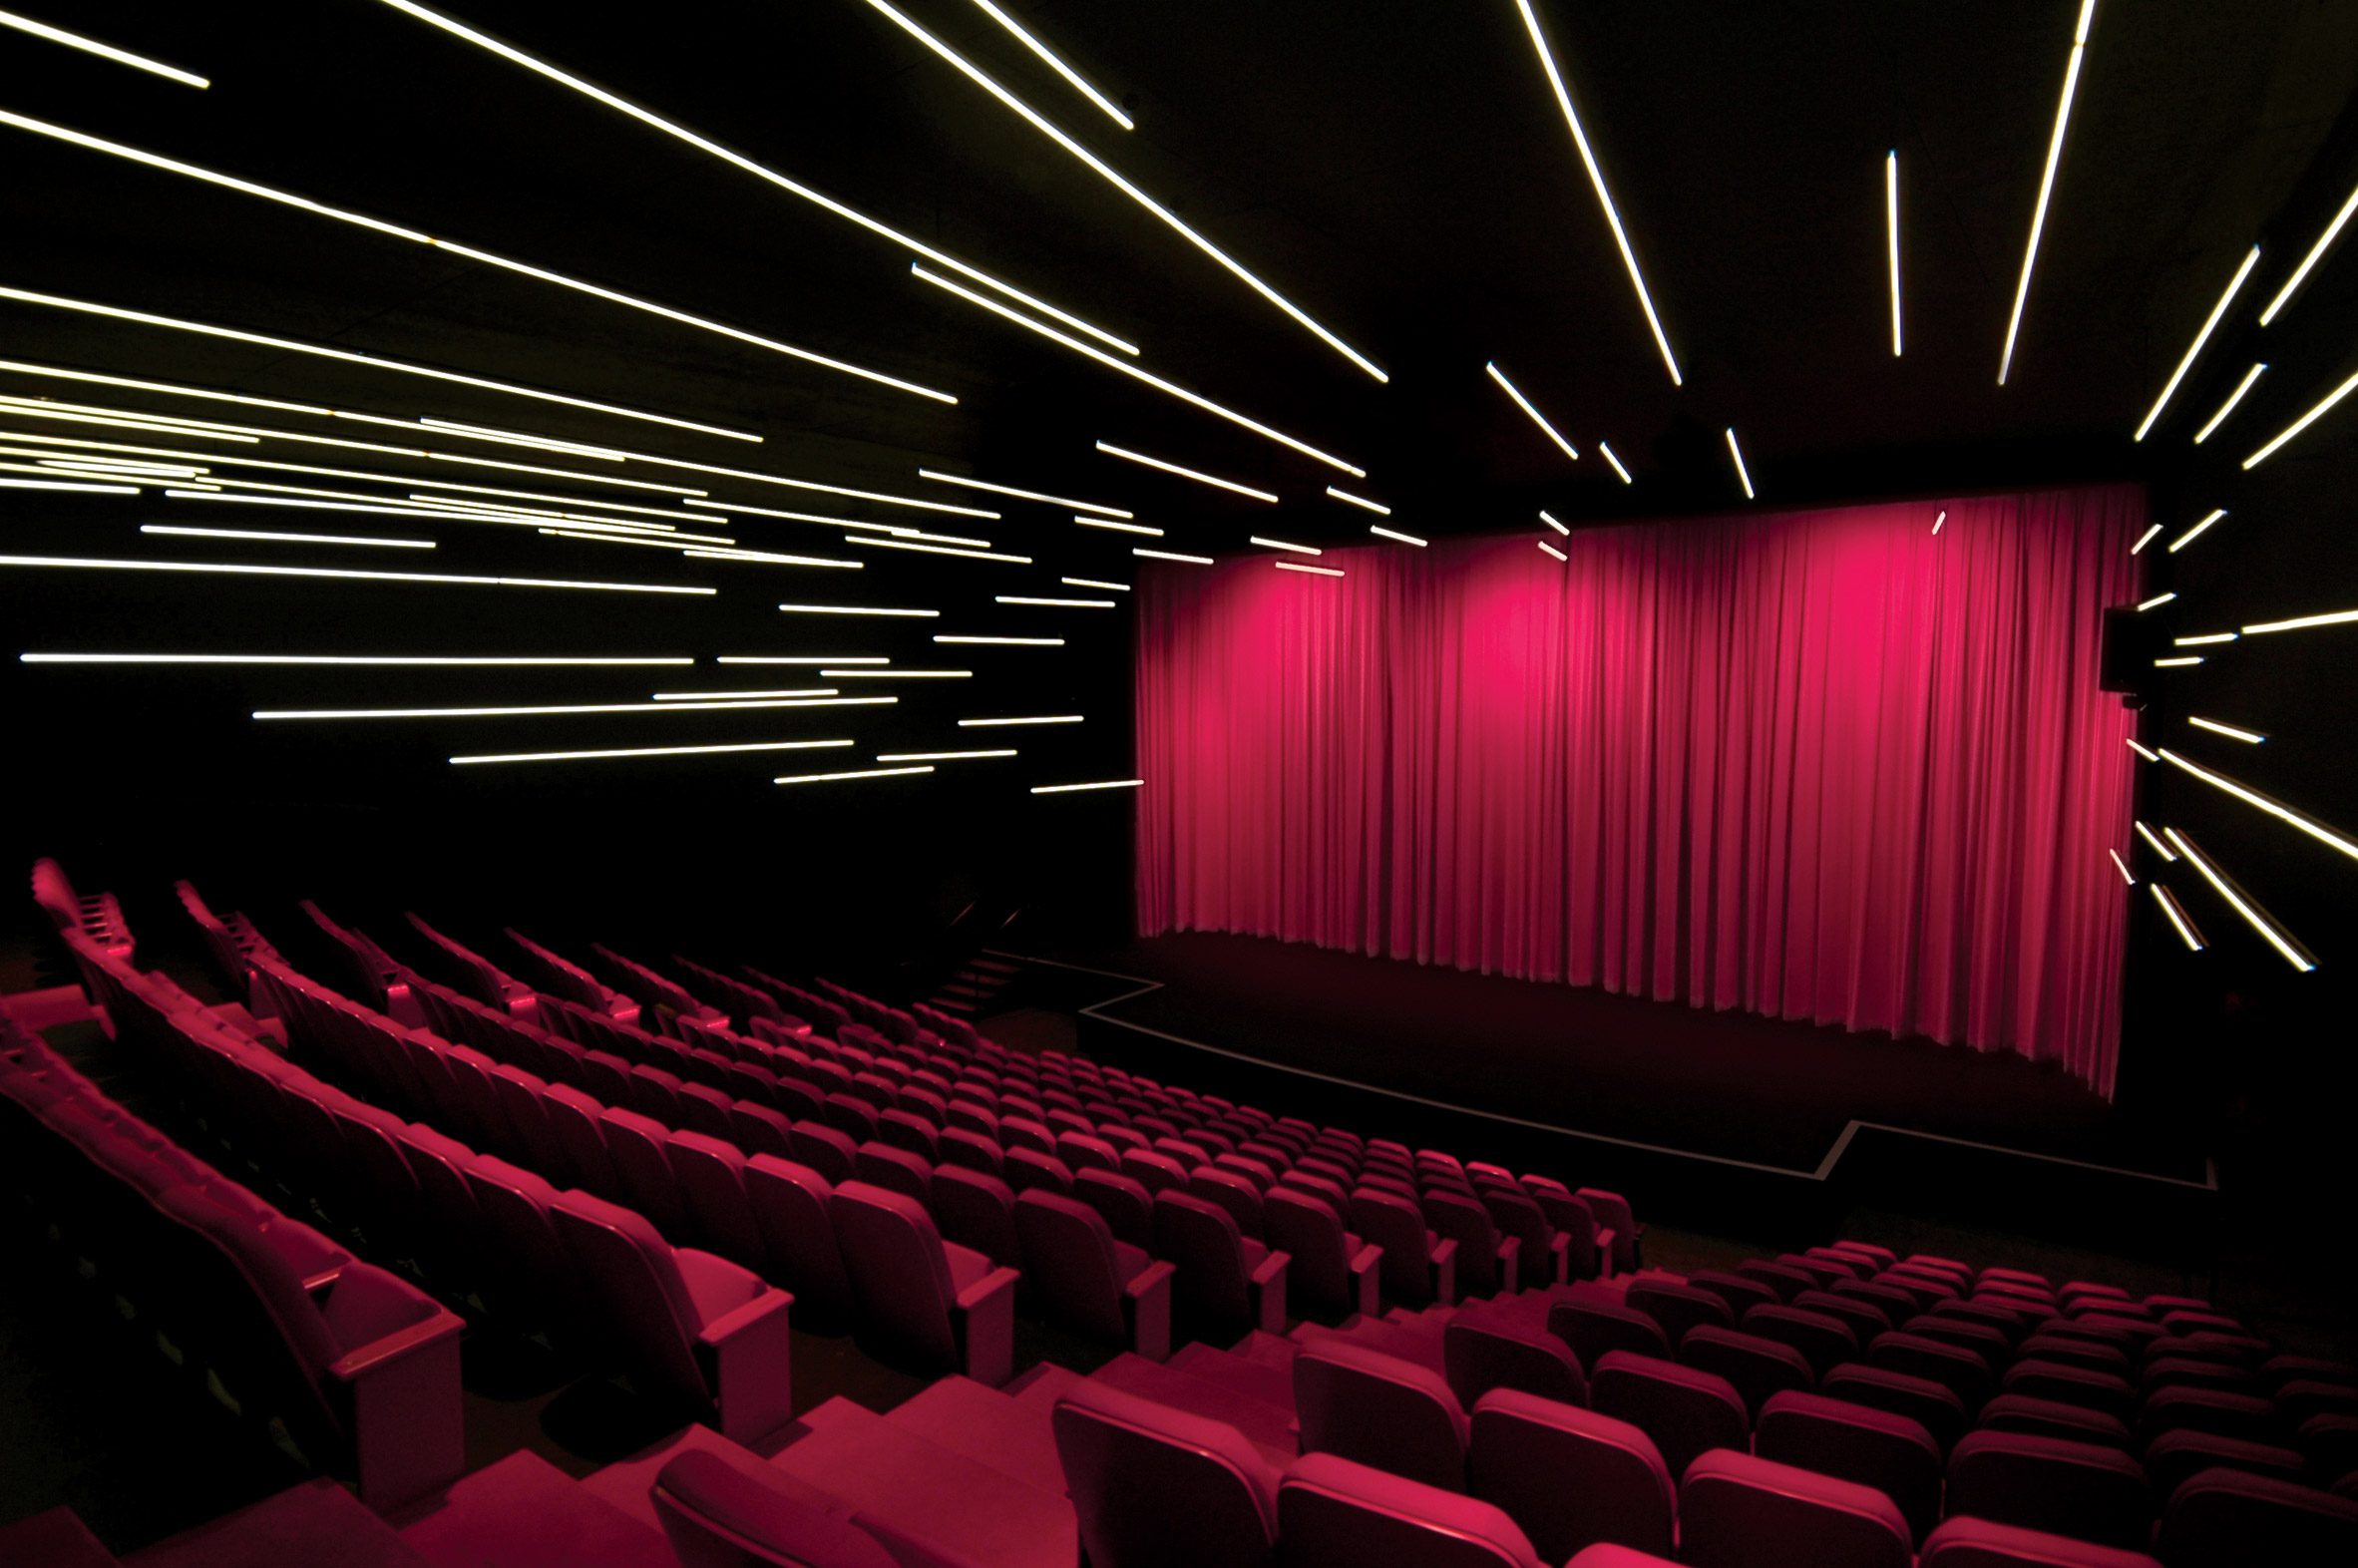 Theatre space with black walls and ceilings, strip lighting and hot pink seats